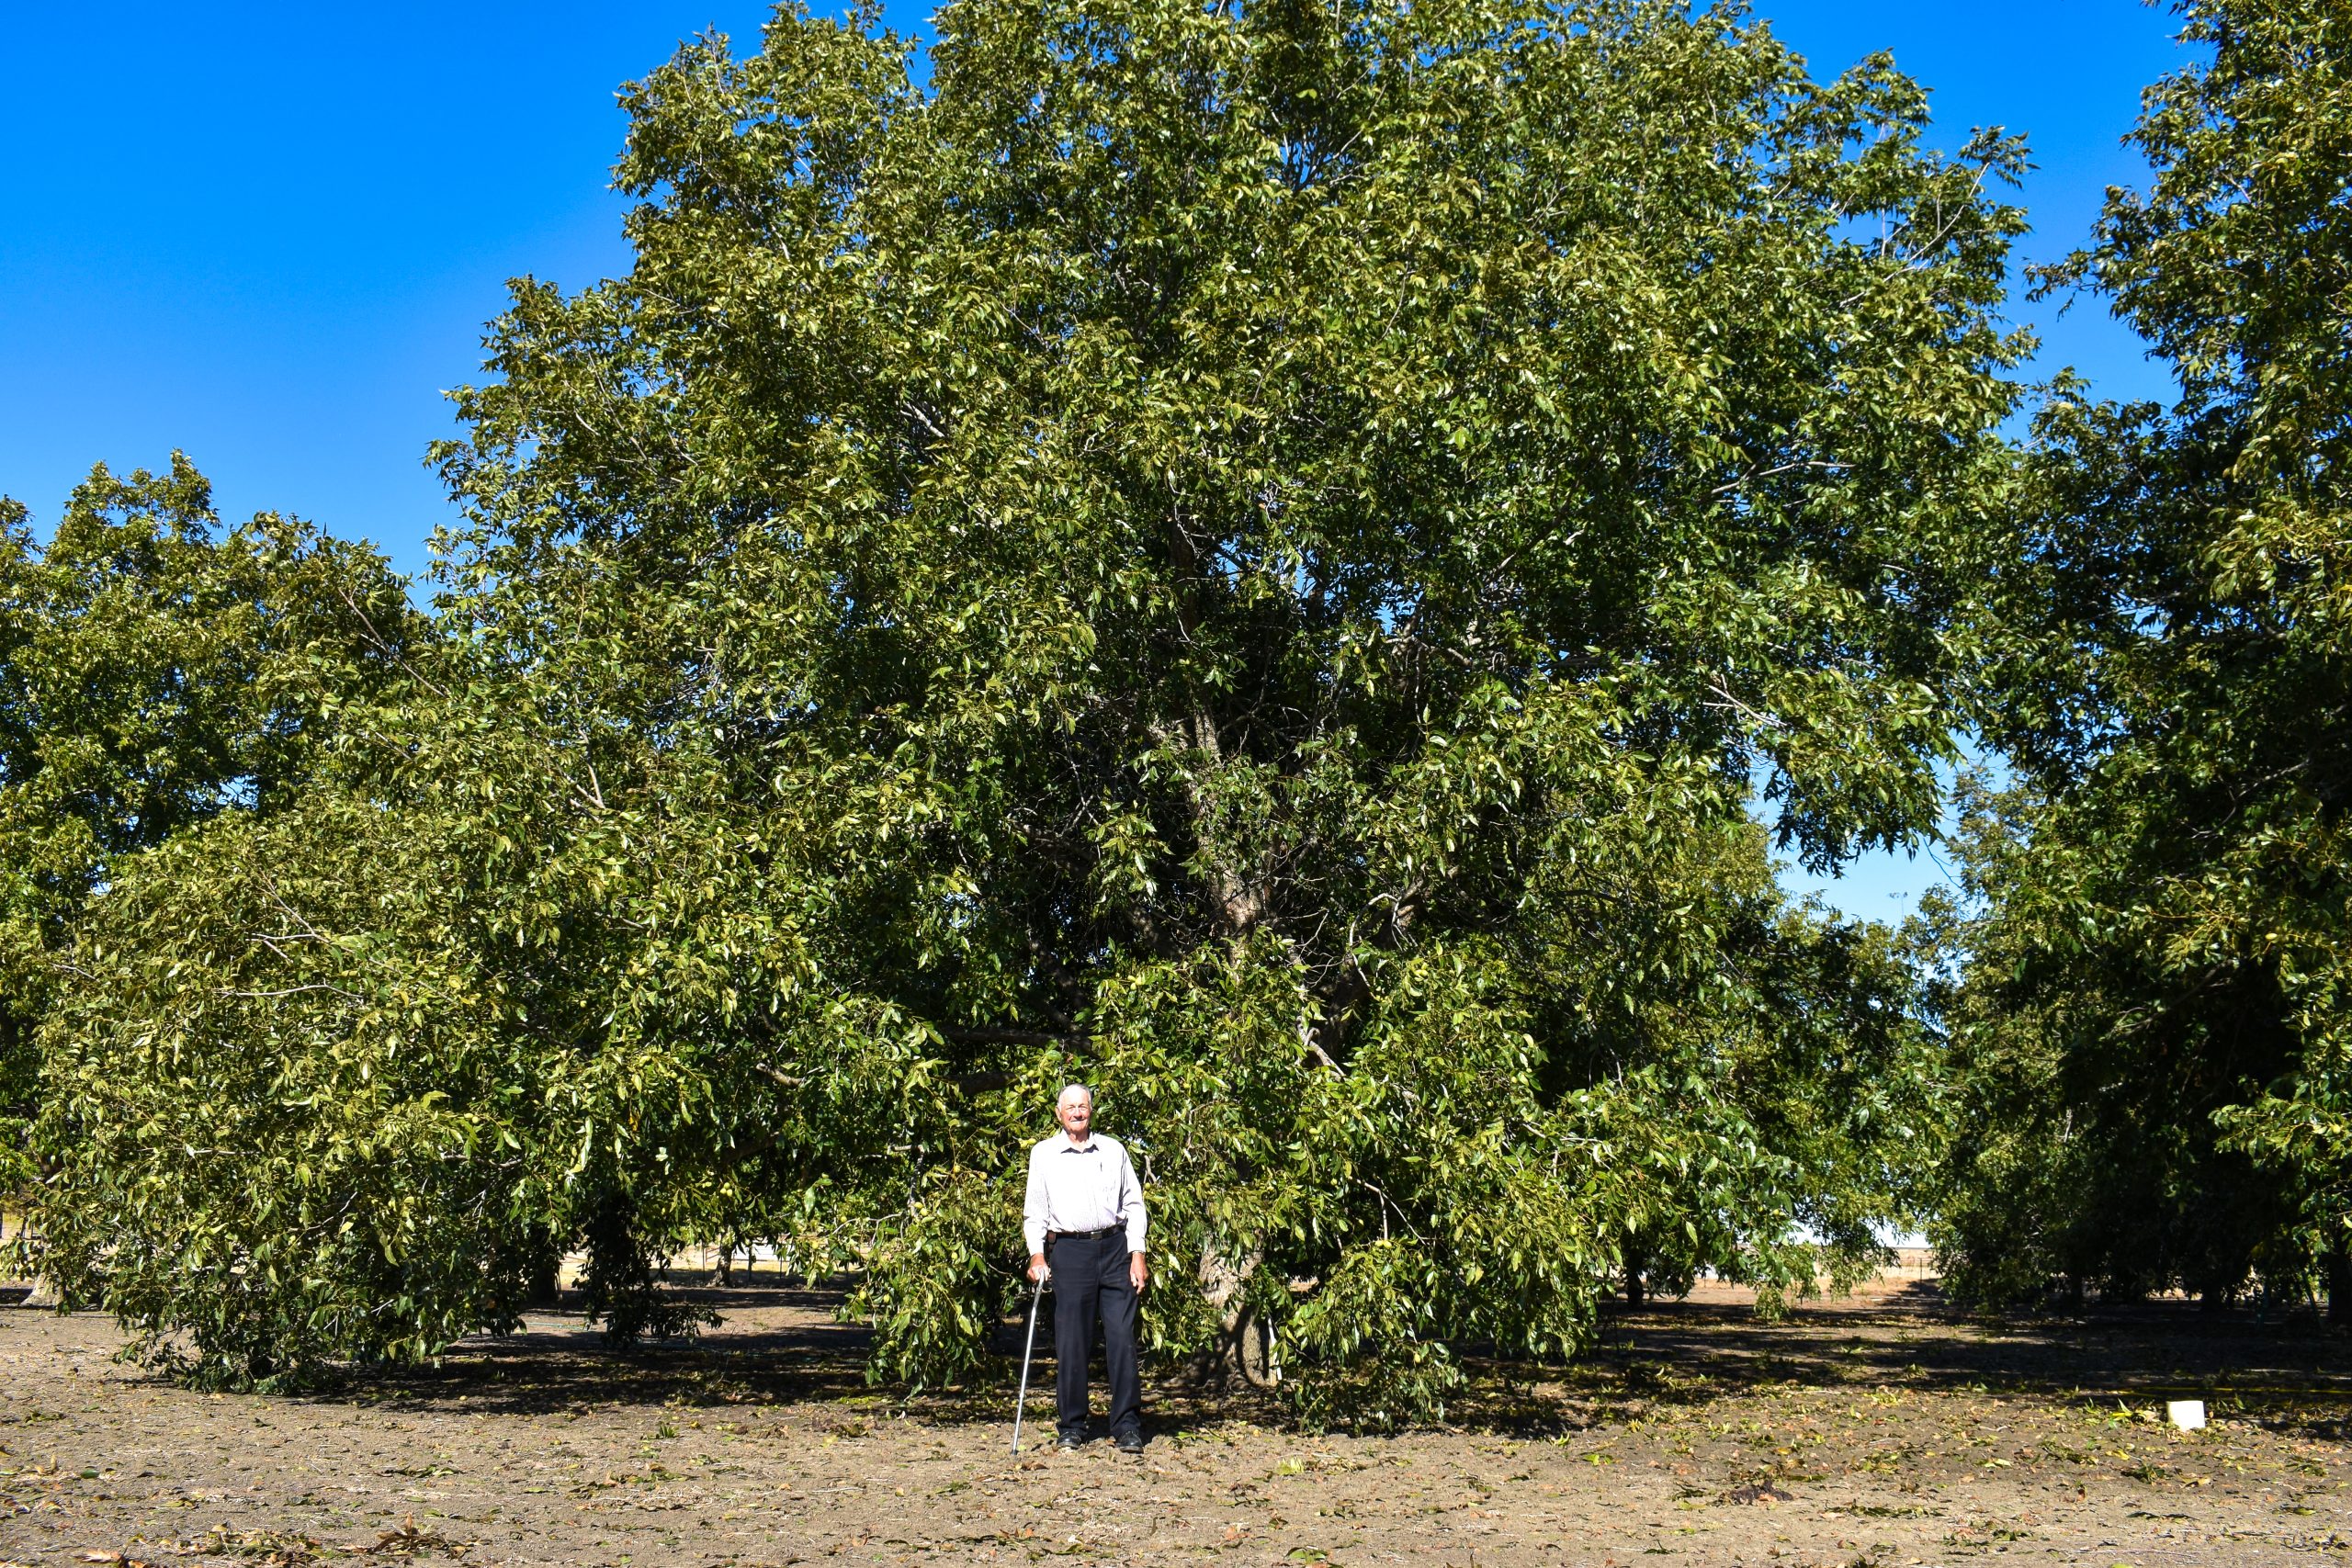 A man stands in front of a large pecan tree with a full green canopy.